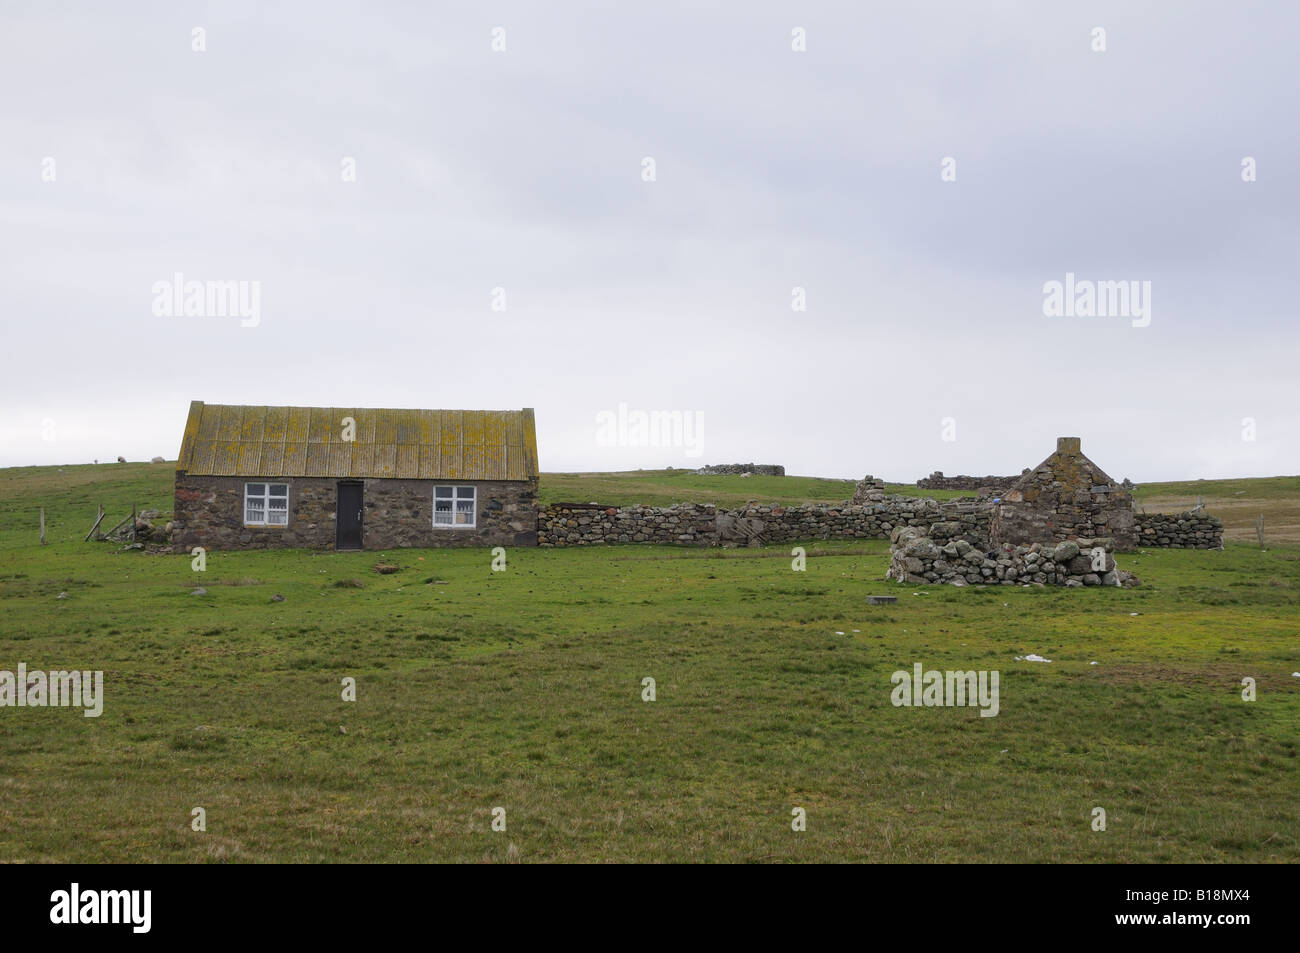 Shetland croft. In Shetland, people use stones as their primary building material. There are almost no trees. Stock Photo